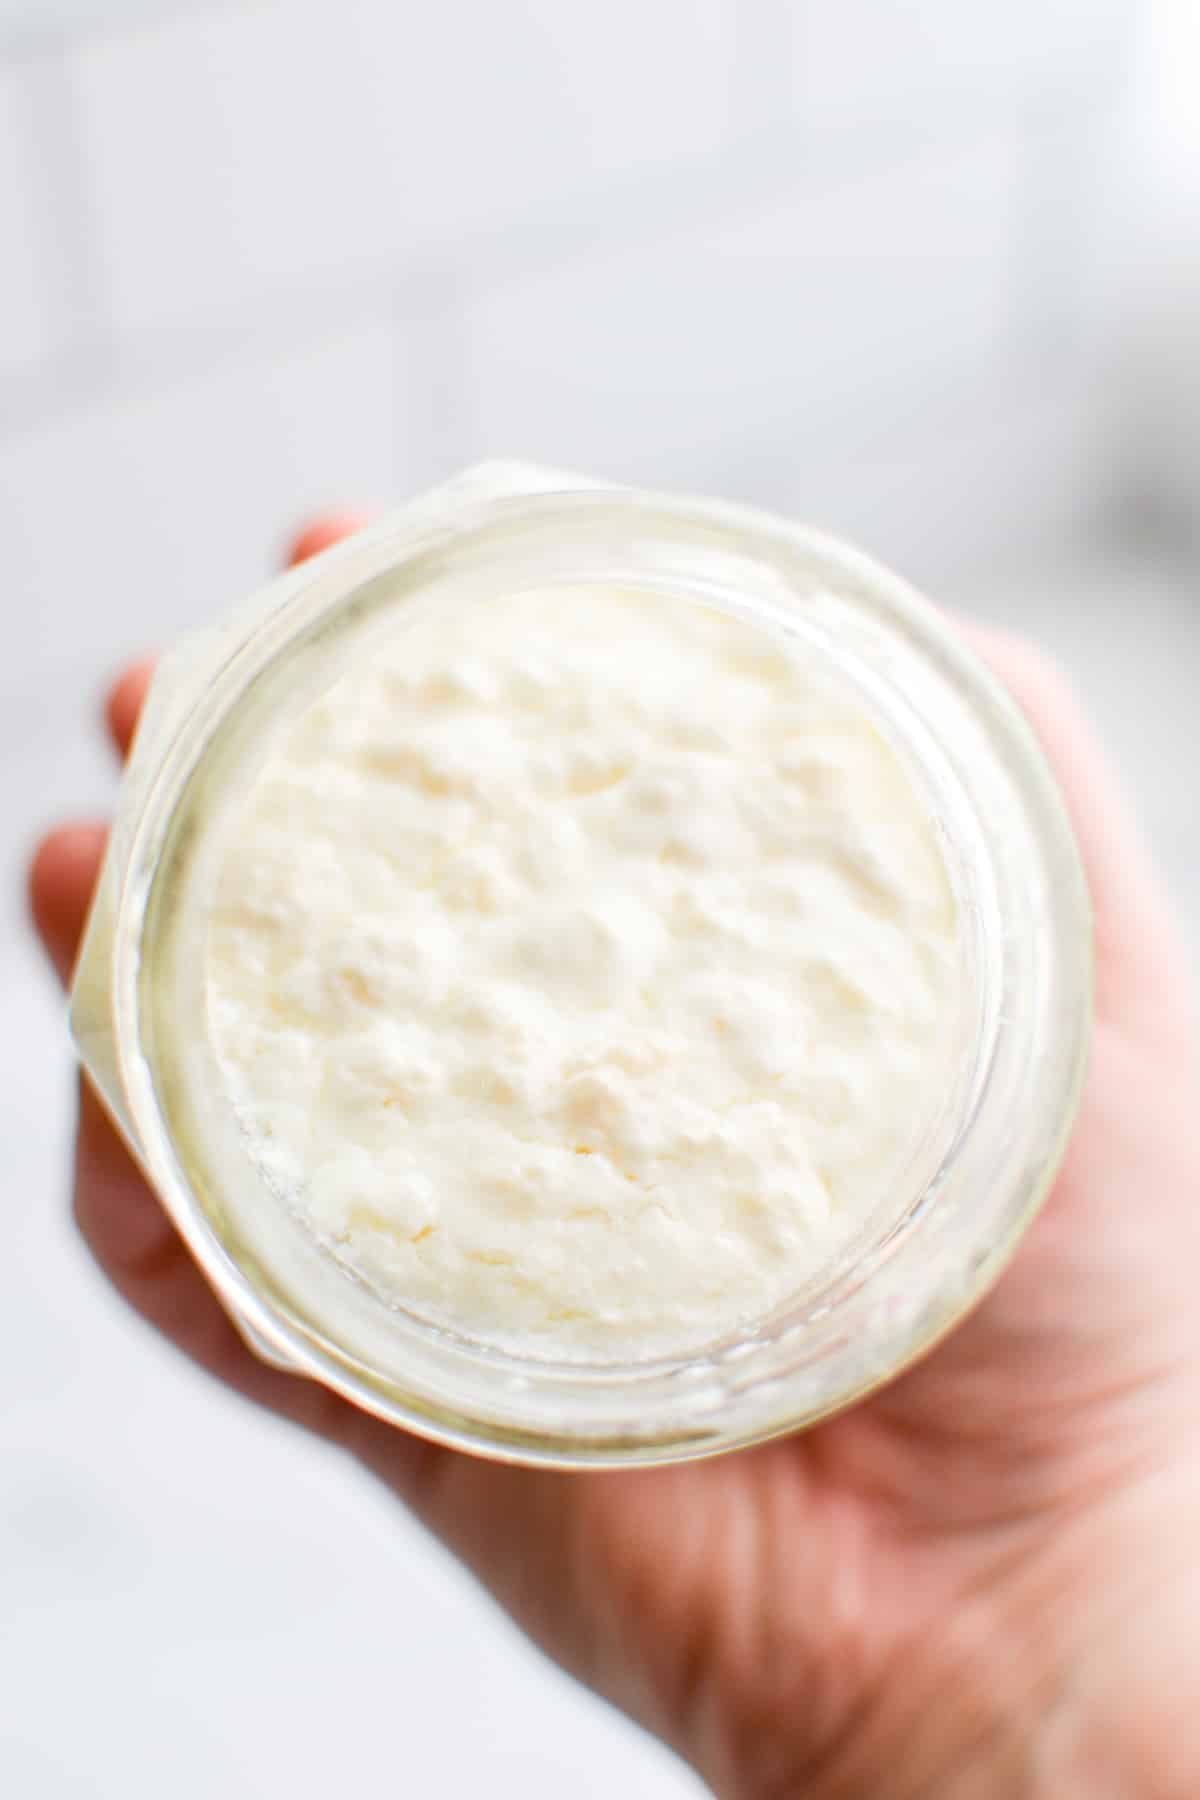 A jar of kefir being held up, with the grains floating to the top.